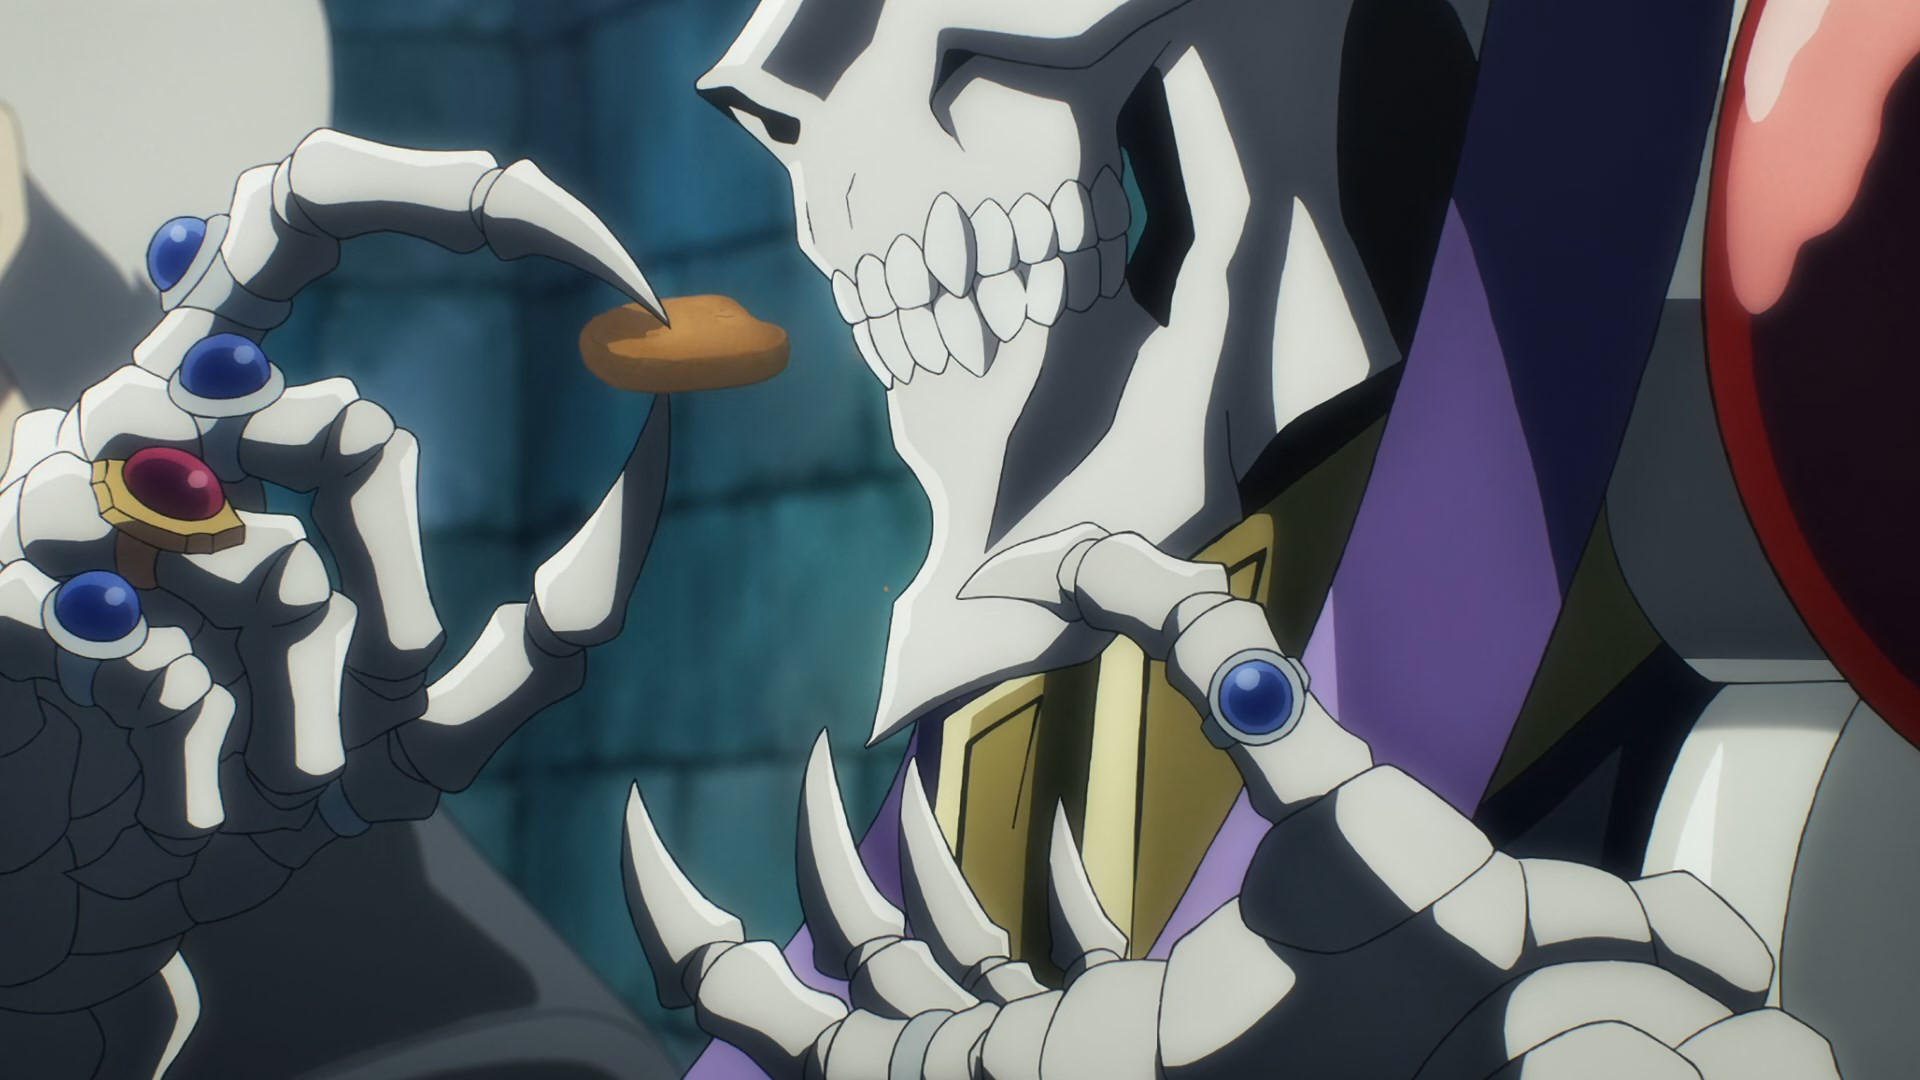 Overlord IV Episode 09, Overlord Wiki